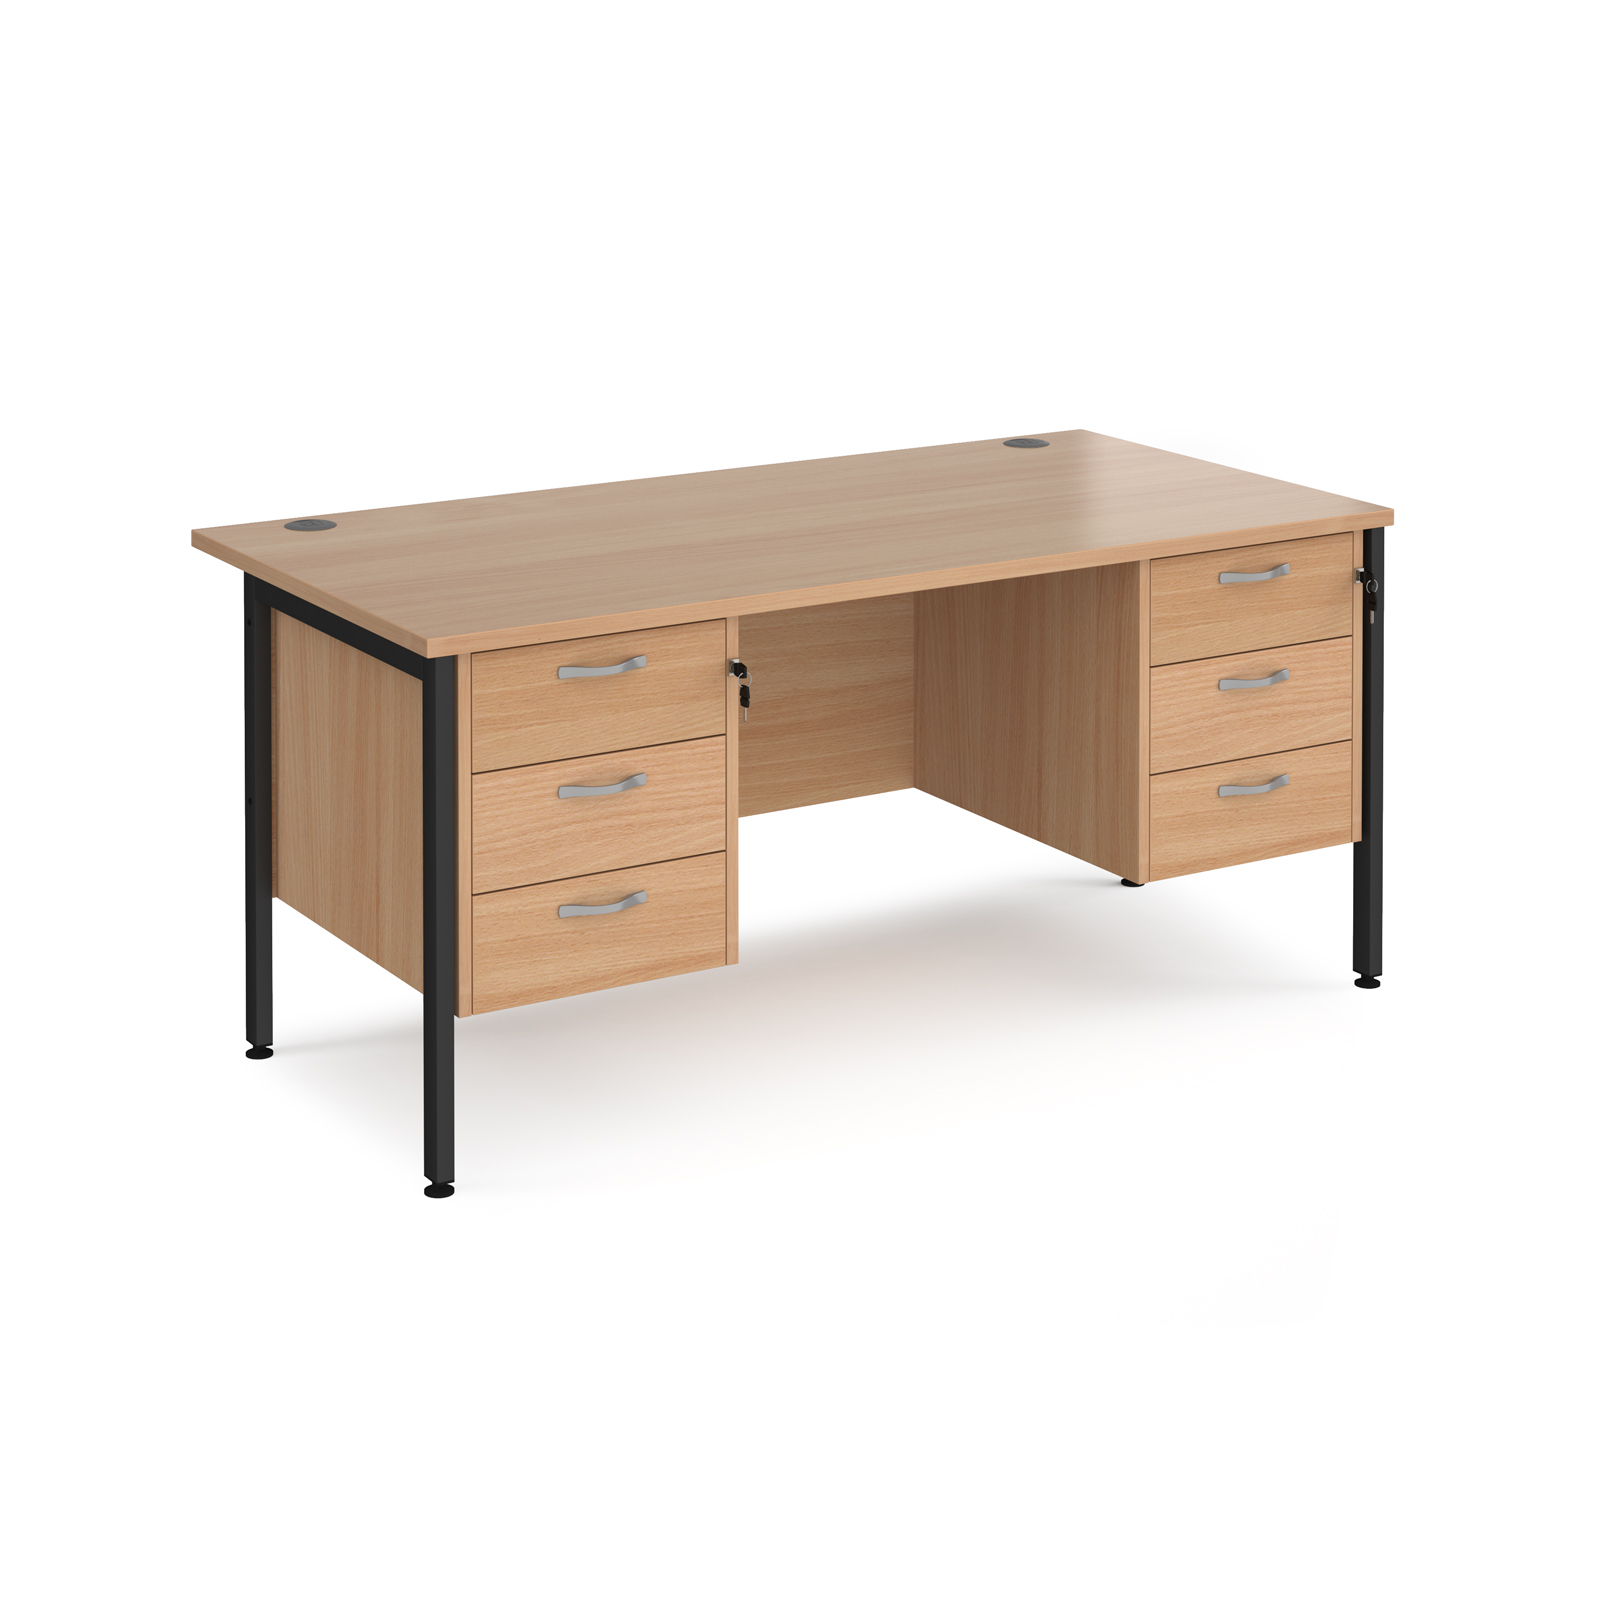 Maestro 25 straight desk 1600mm x 800mm with two x 3 drawer pedestals - black H-frame leg, beech top